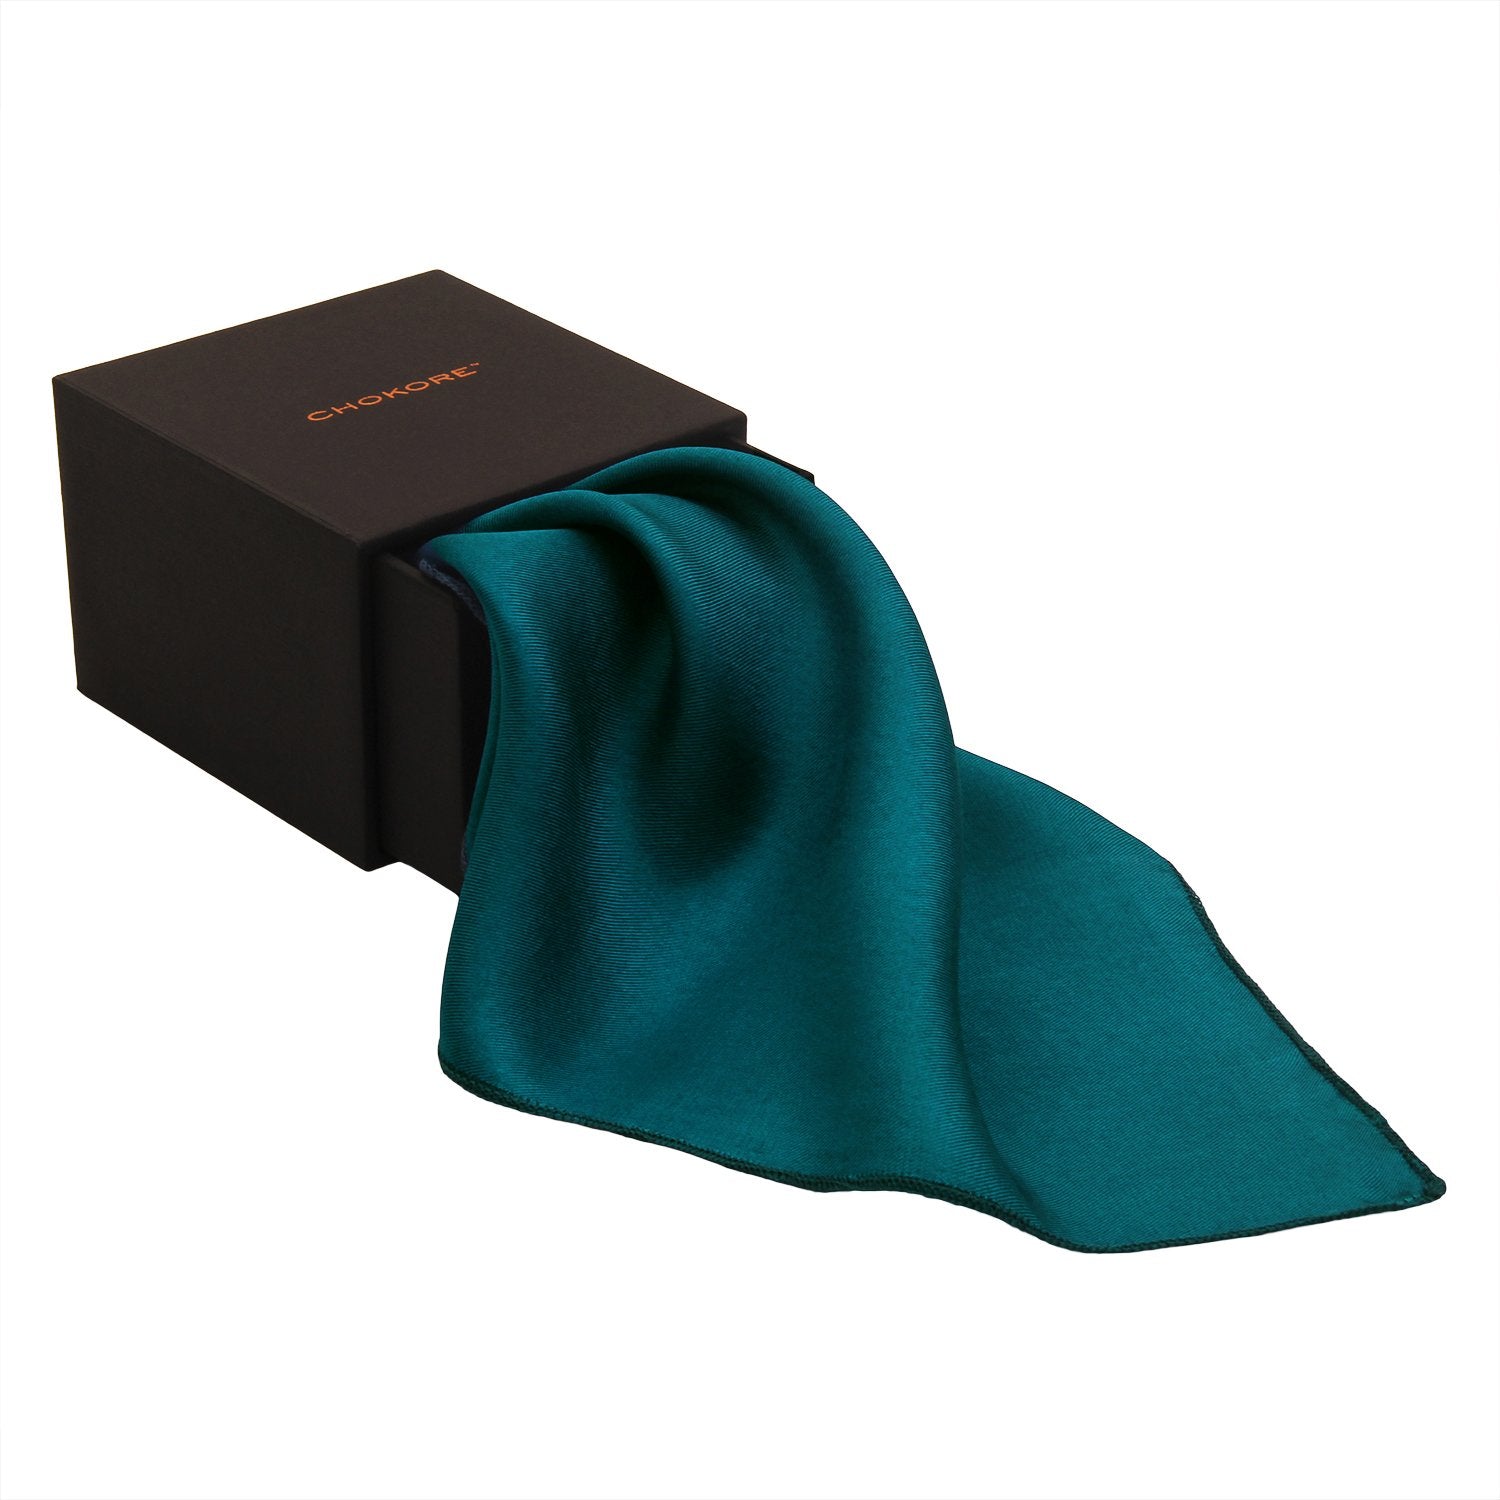 Chokore Celestial Pure Silk Pocket Square, from the Solids Line